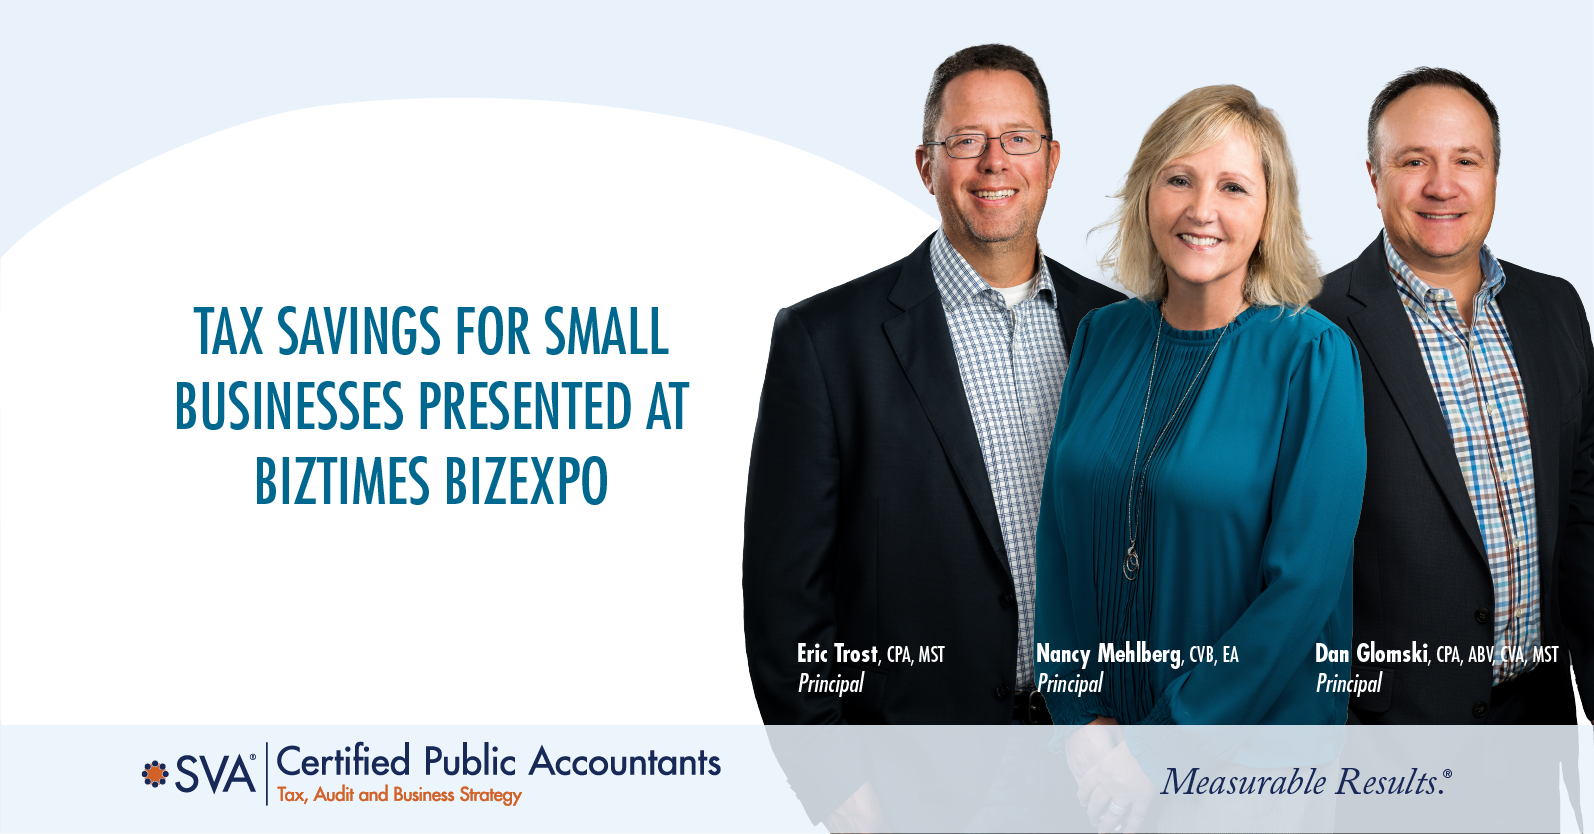 Tax Savings for Small Businesses Presented at BizTimes BizExpo  